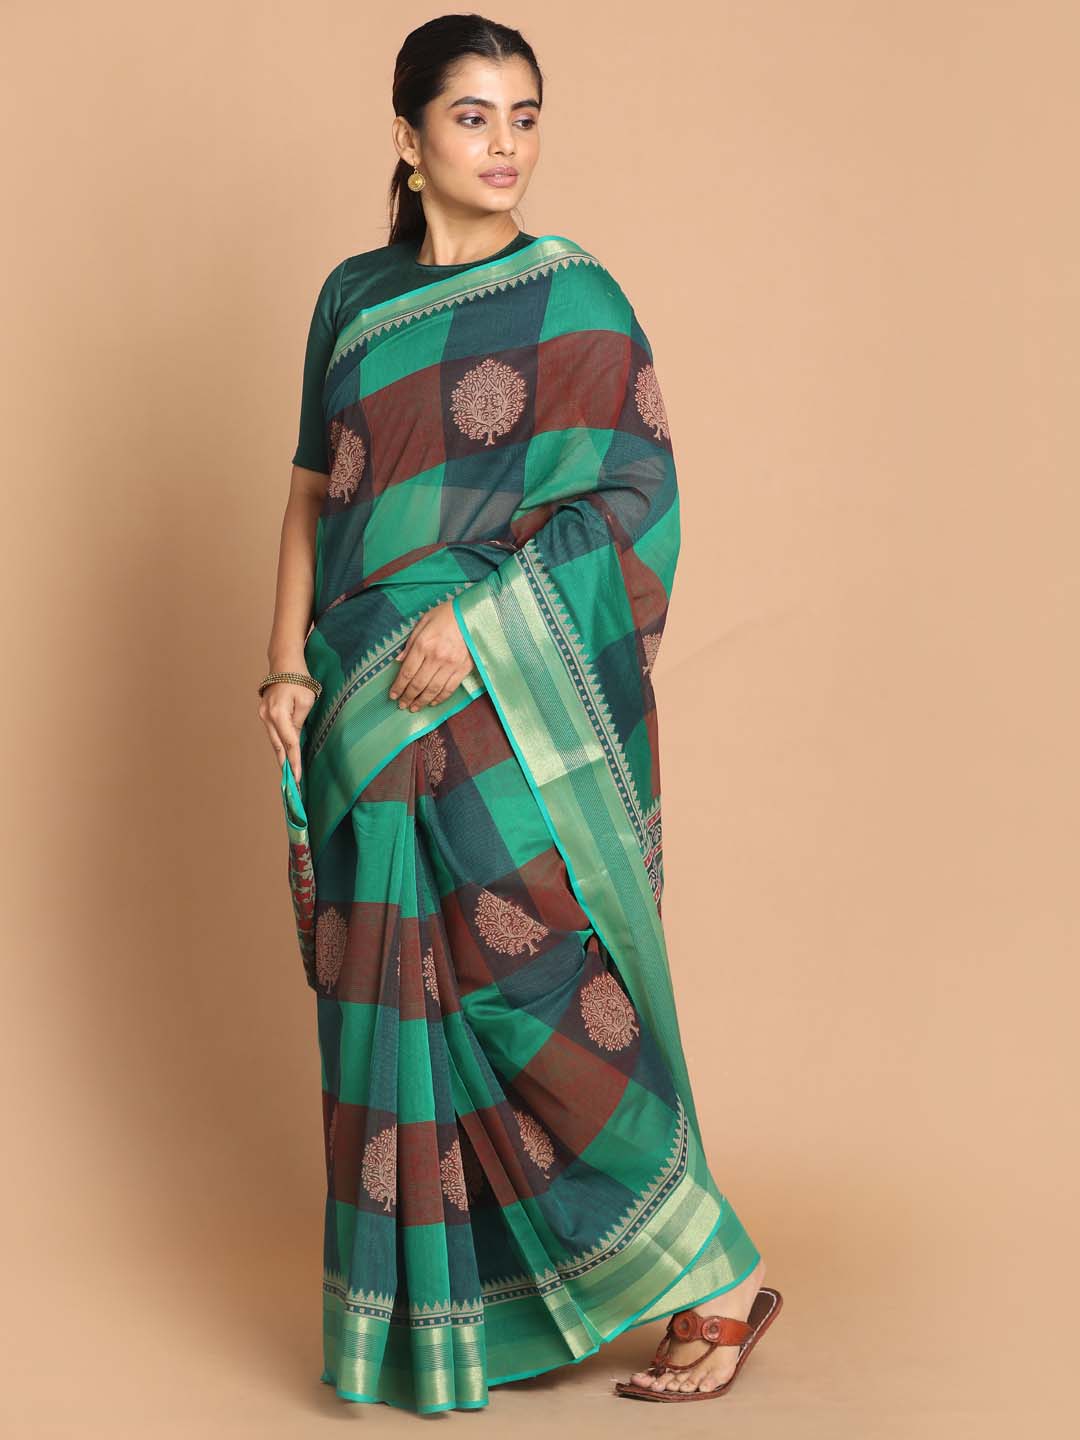 Indethnic Printed Cotton Blend Saree in Green - View 2